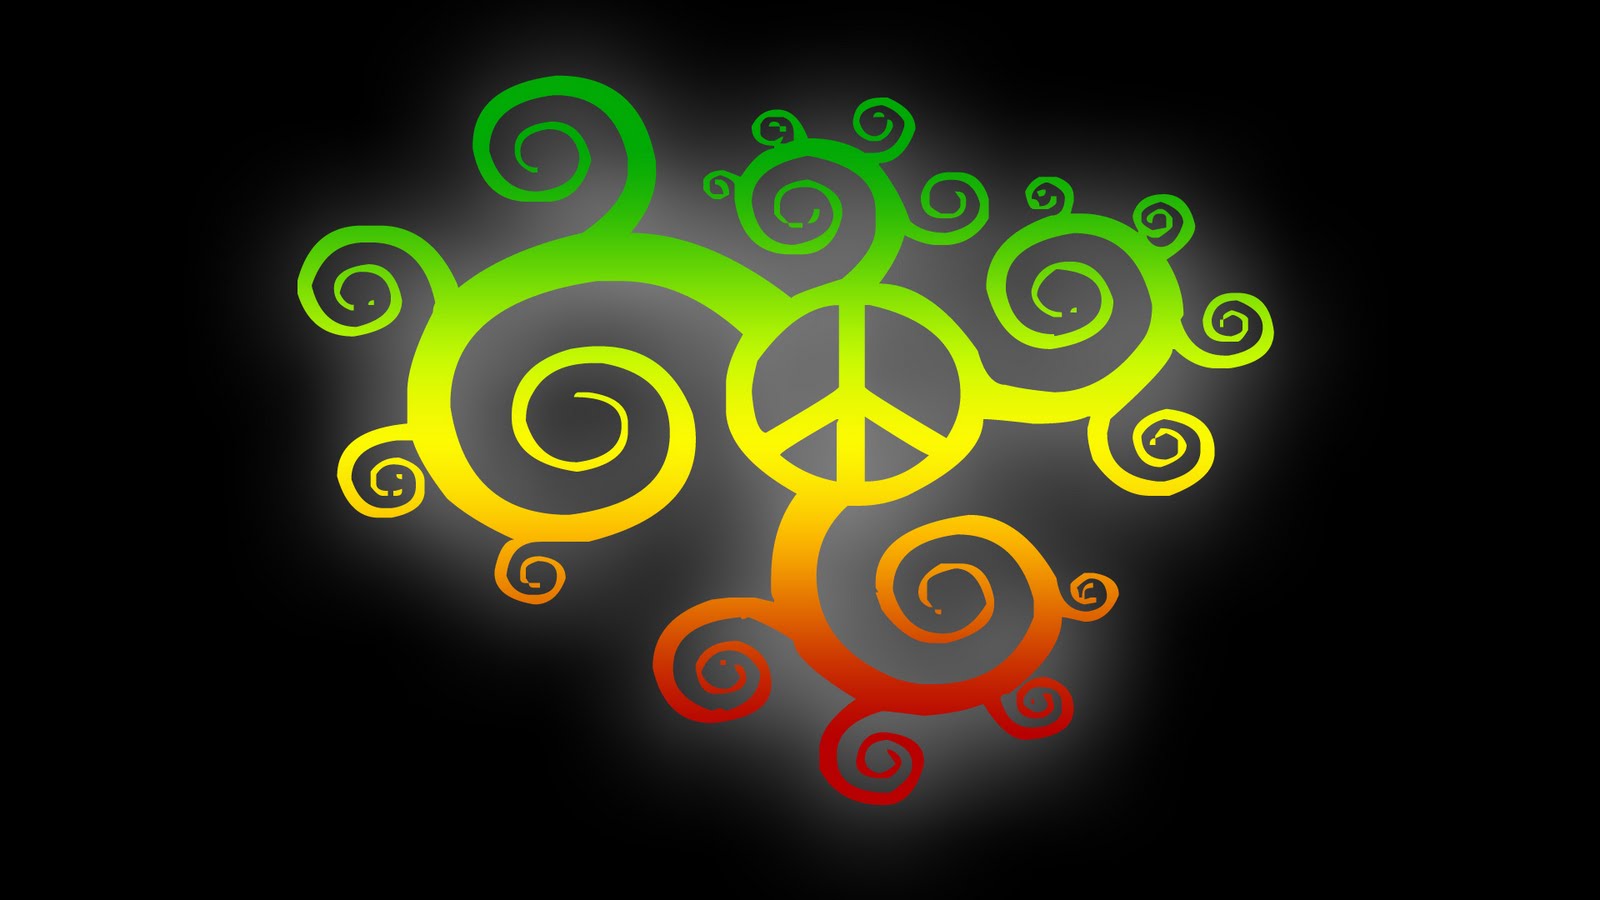 Another New Rasta Color Wallpaper